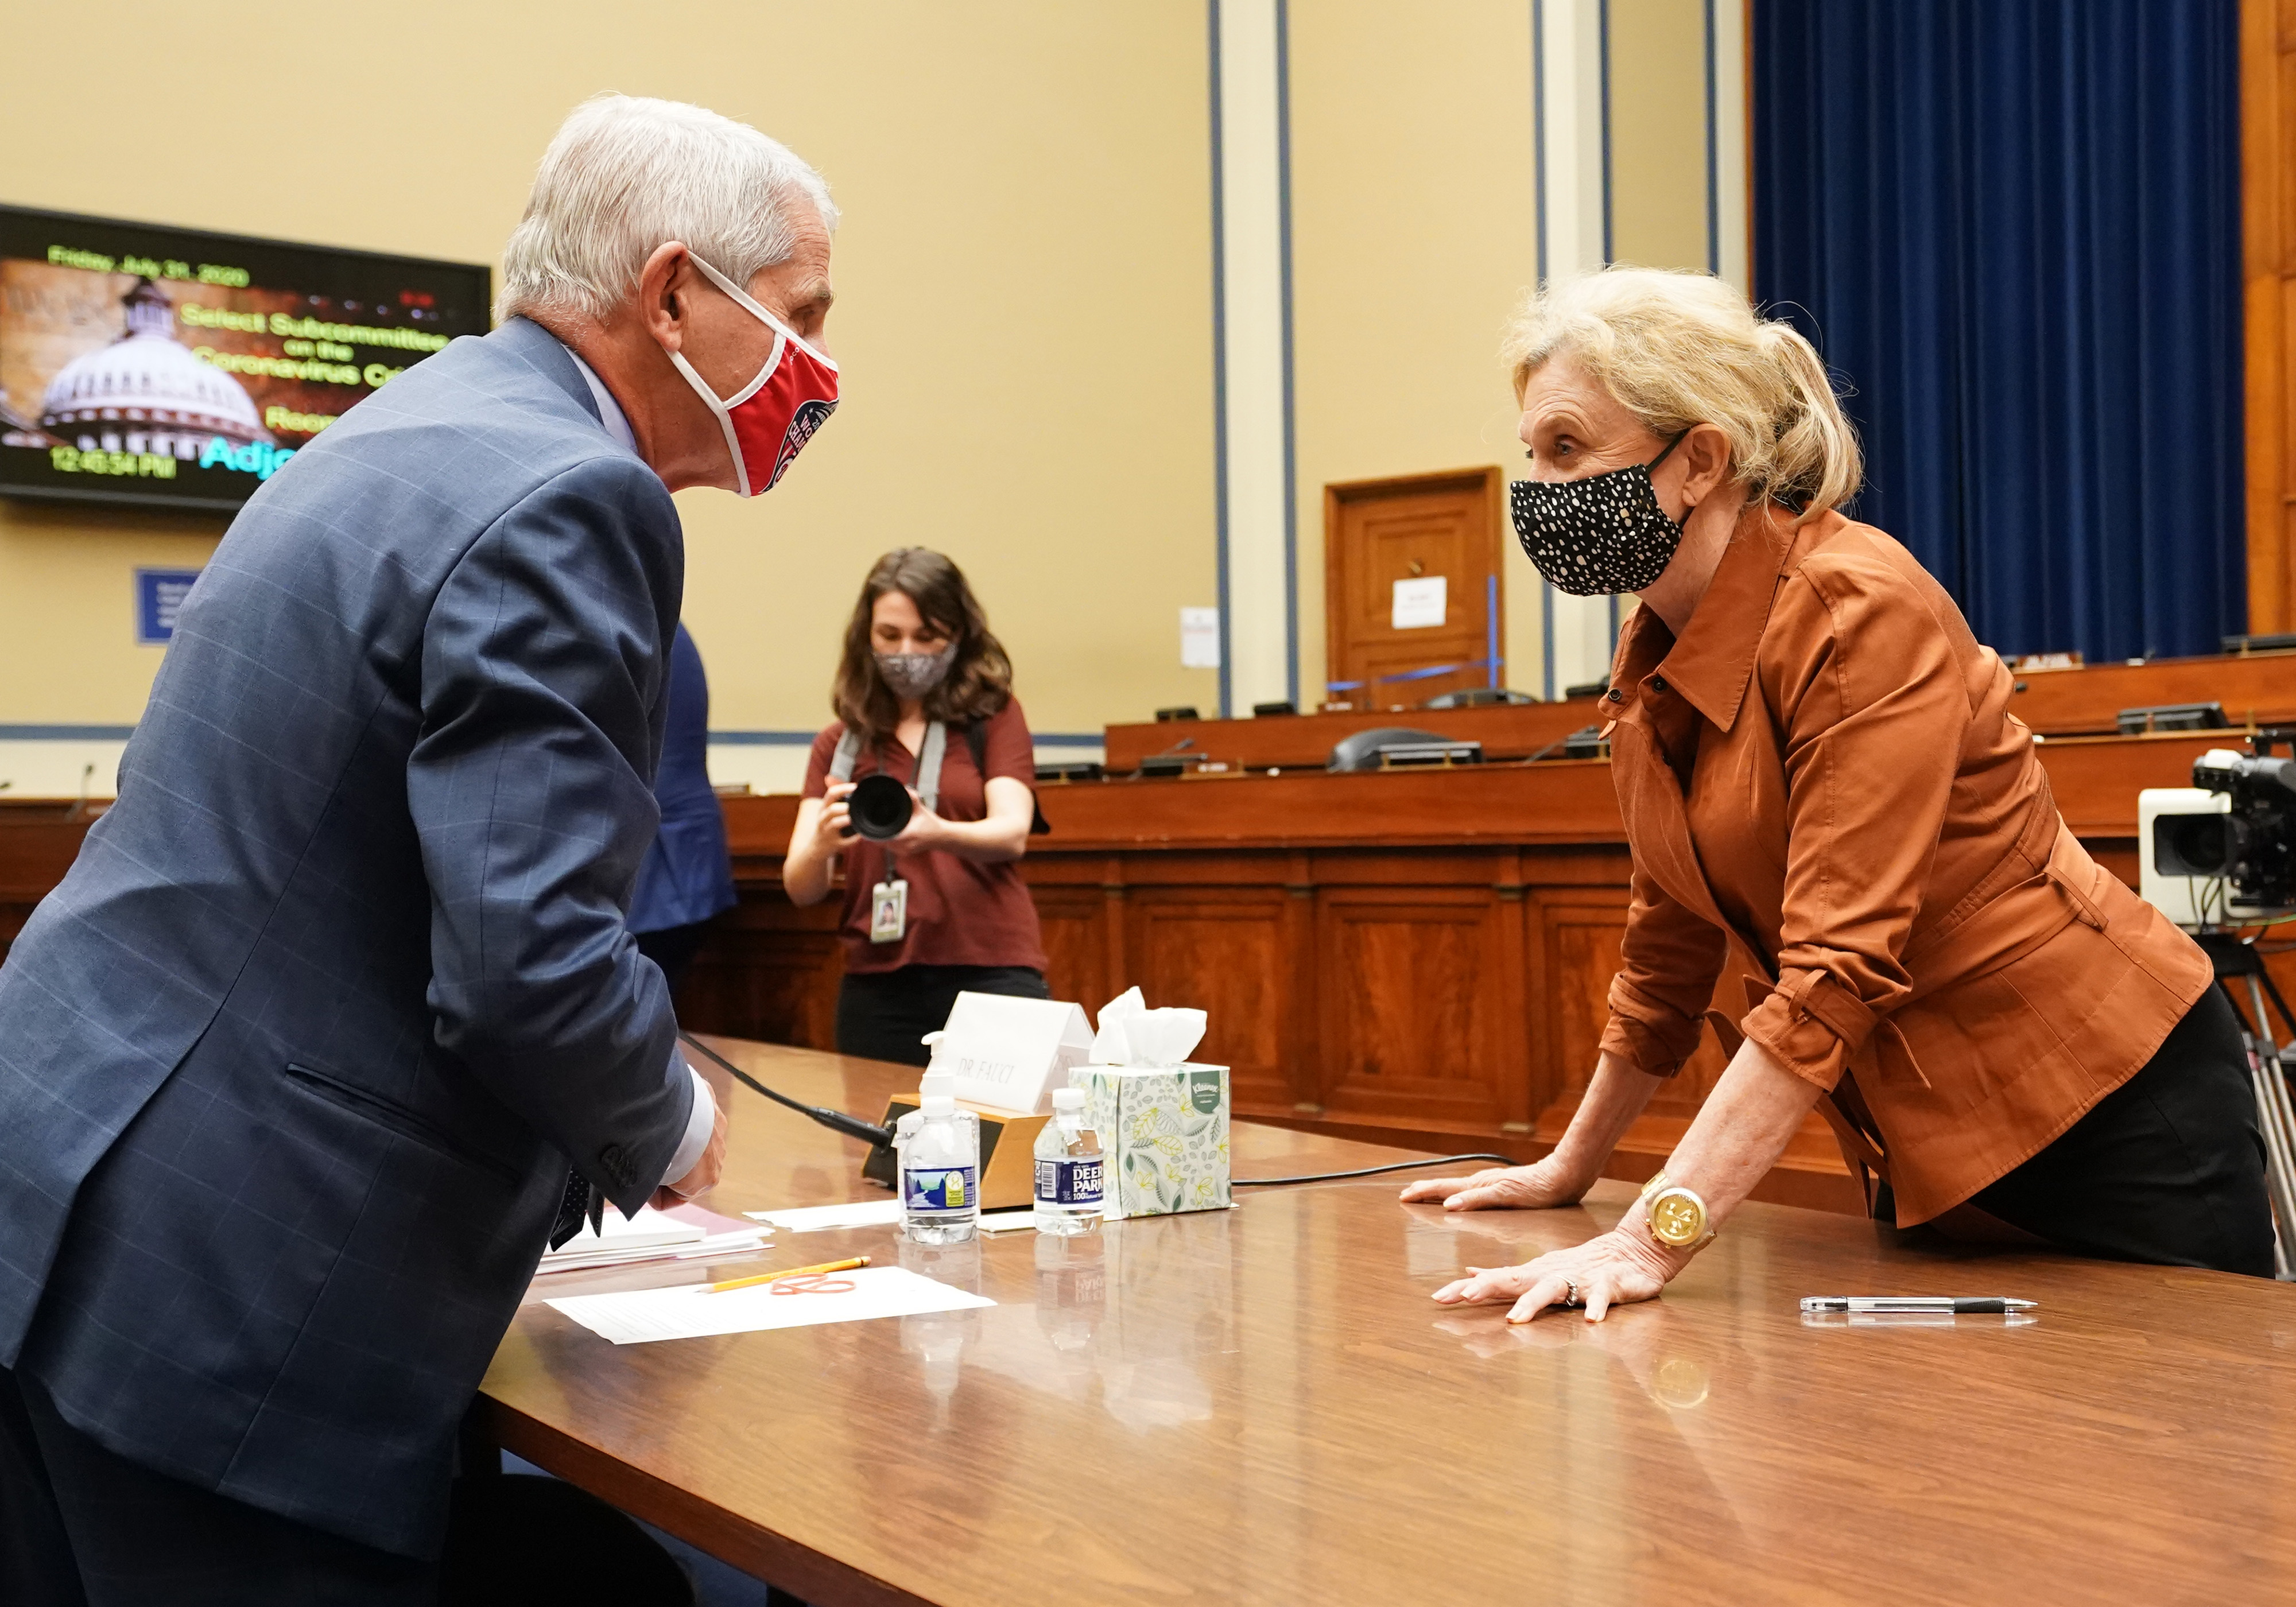 Rep. Carolyn Maloney talks to Dr. Anthony Fauci after a coronavirus hearing on July 31, 2020 in Washington, DC. (Kevin Dietsch-Pool/Getty Images)